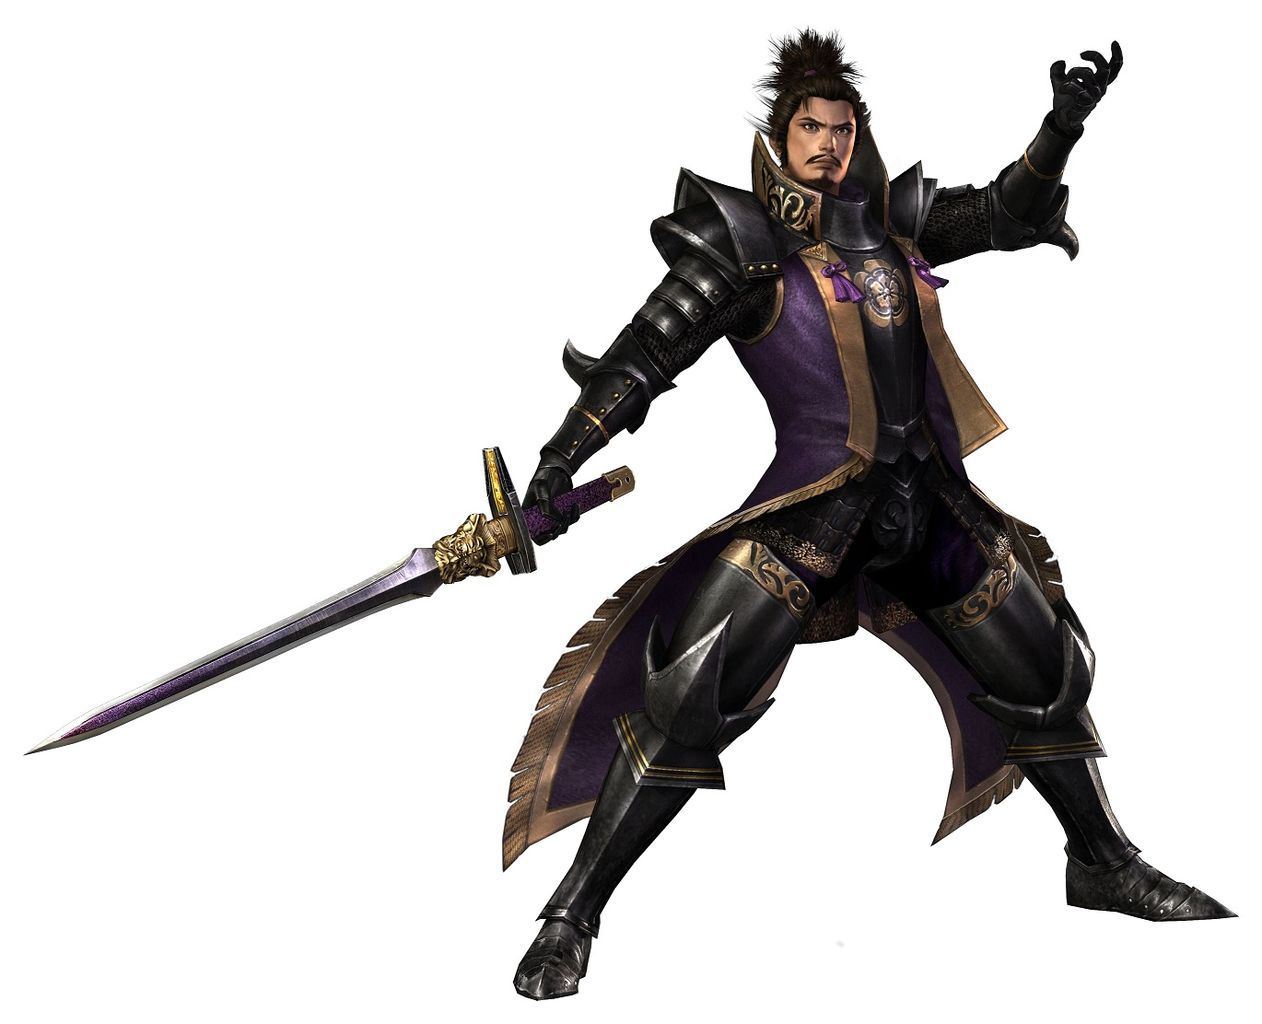 Image of the character in the Samurai Warriors series summary 10